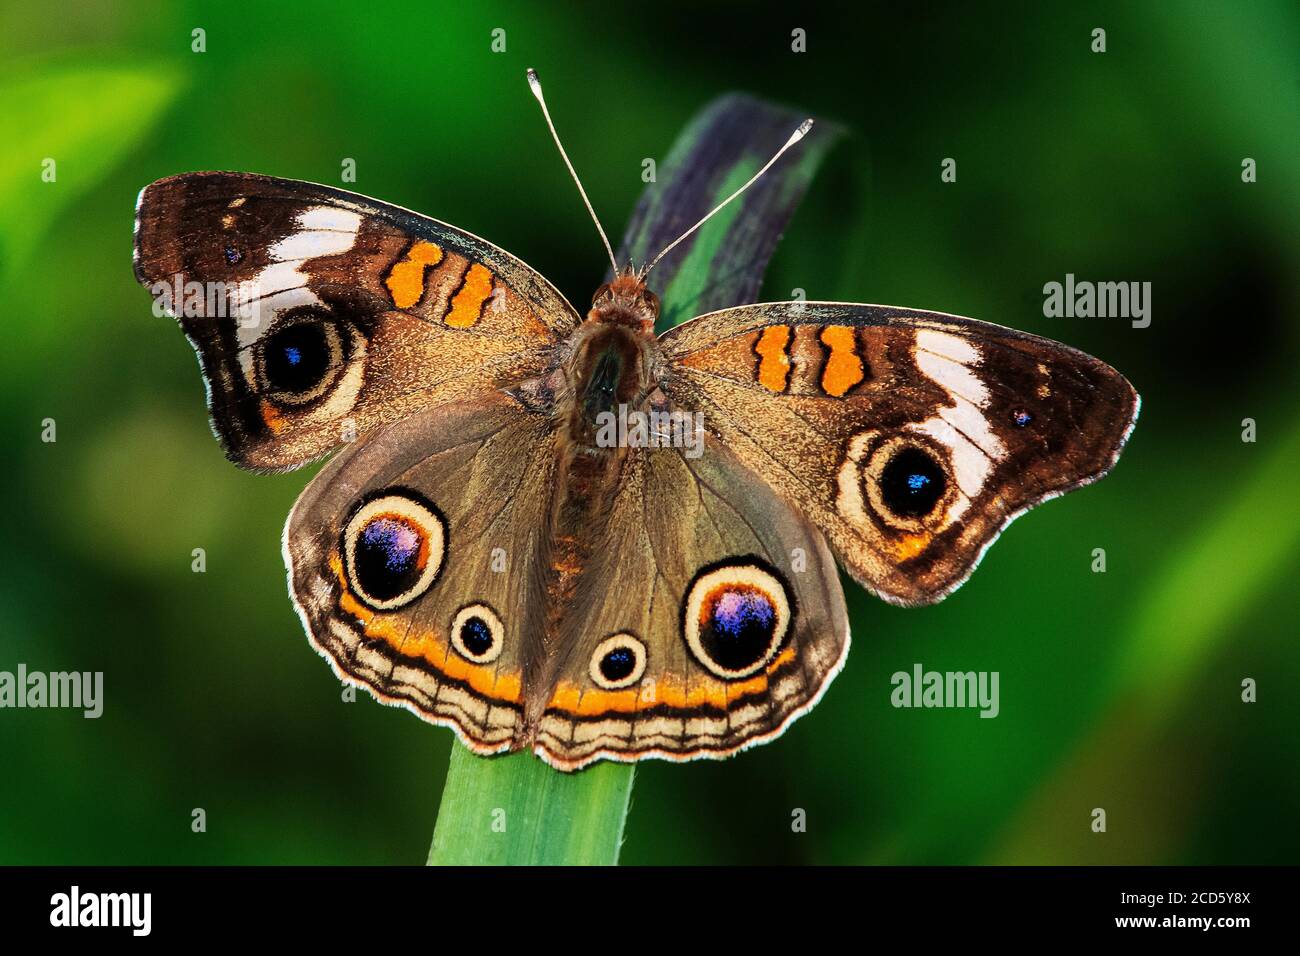 Common buckeye butterfly close-up Stock Photo